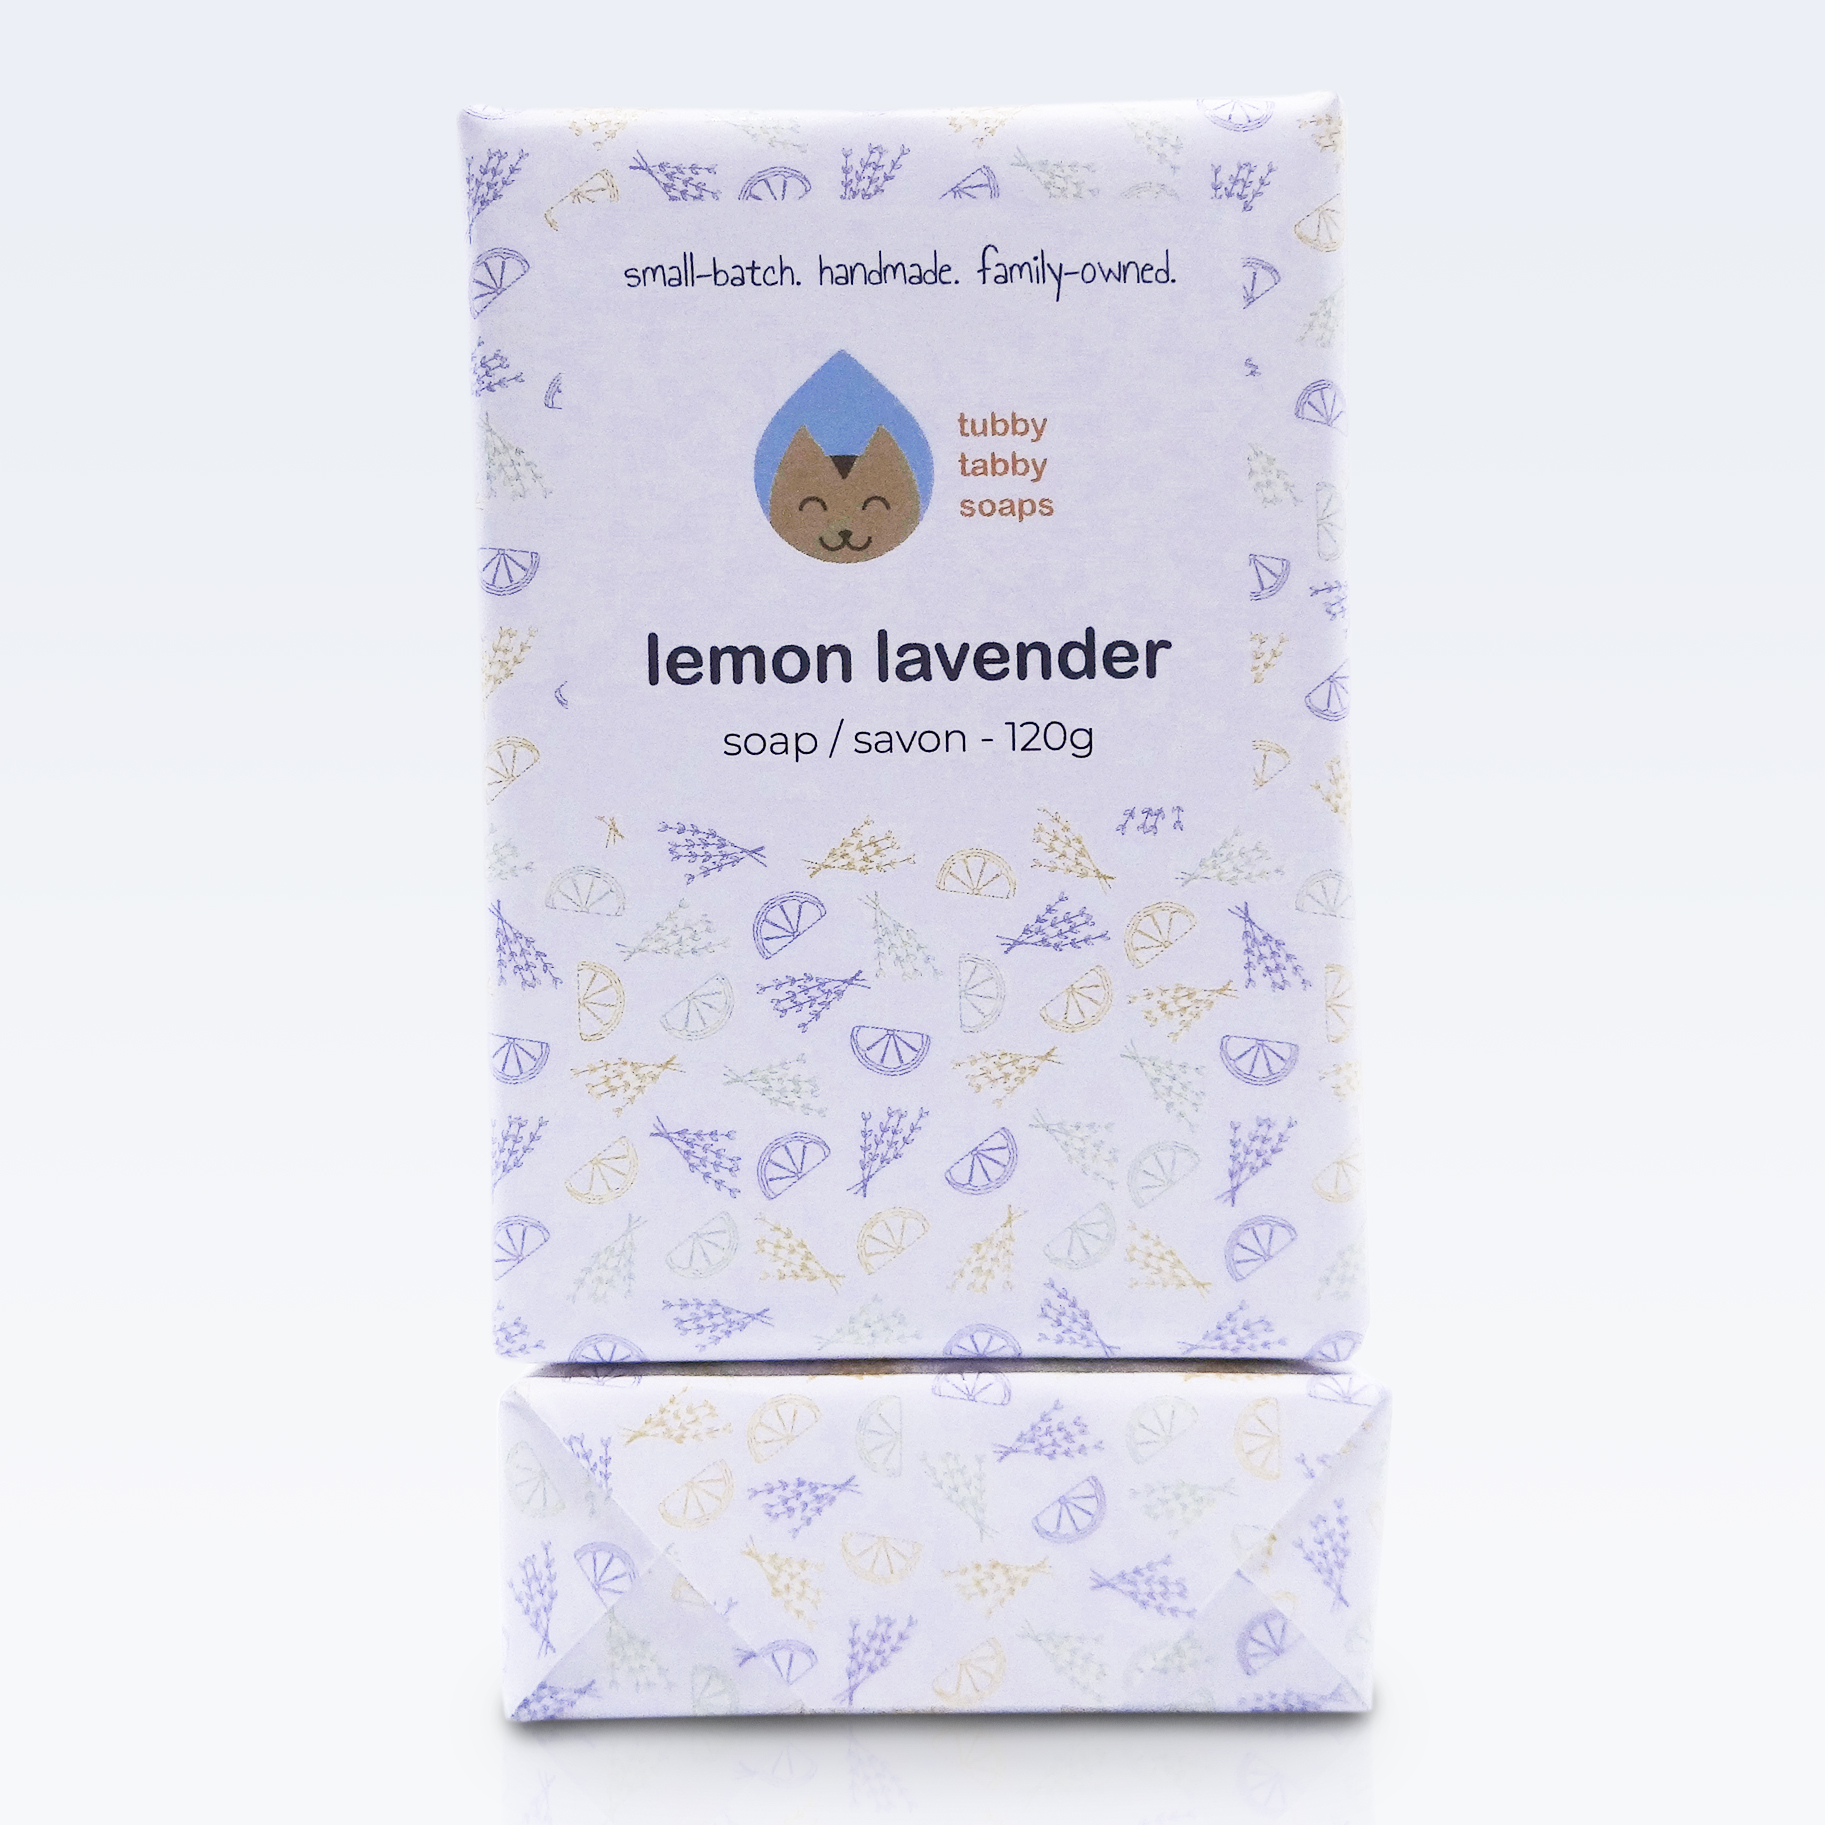 Lemon Lavender handmade soap by Tubby Tabby Soaps (all natural with essential oils and alkanet root)